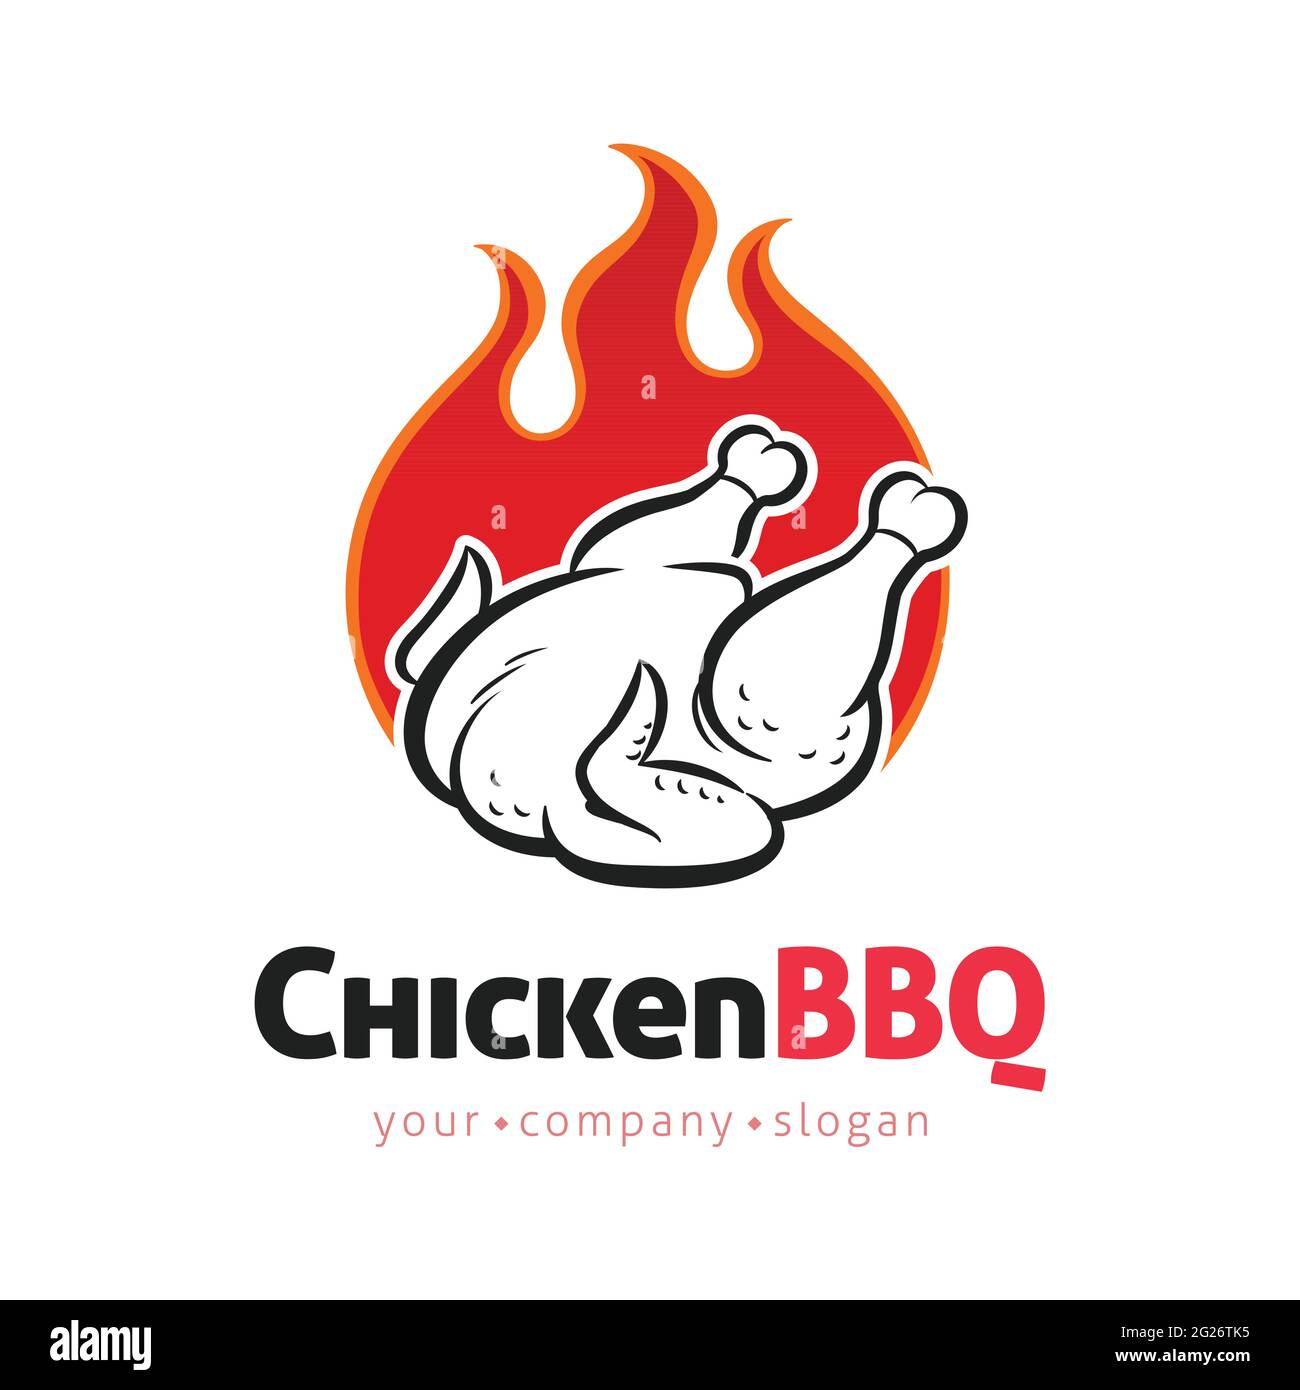 grilled-chicken-vector-logo-design-template-with-flames-barbecue